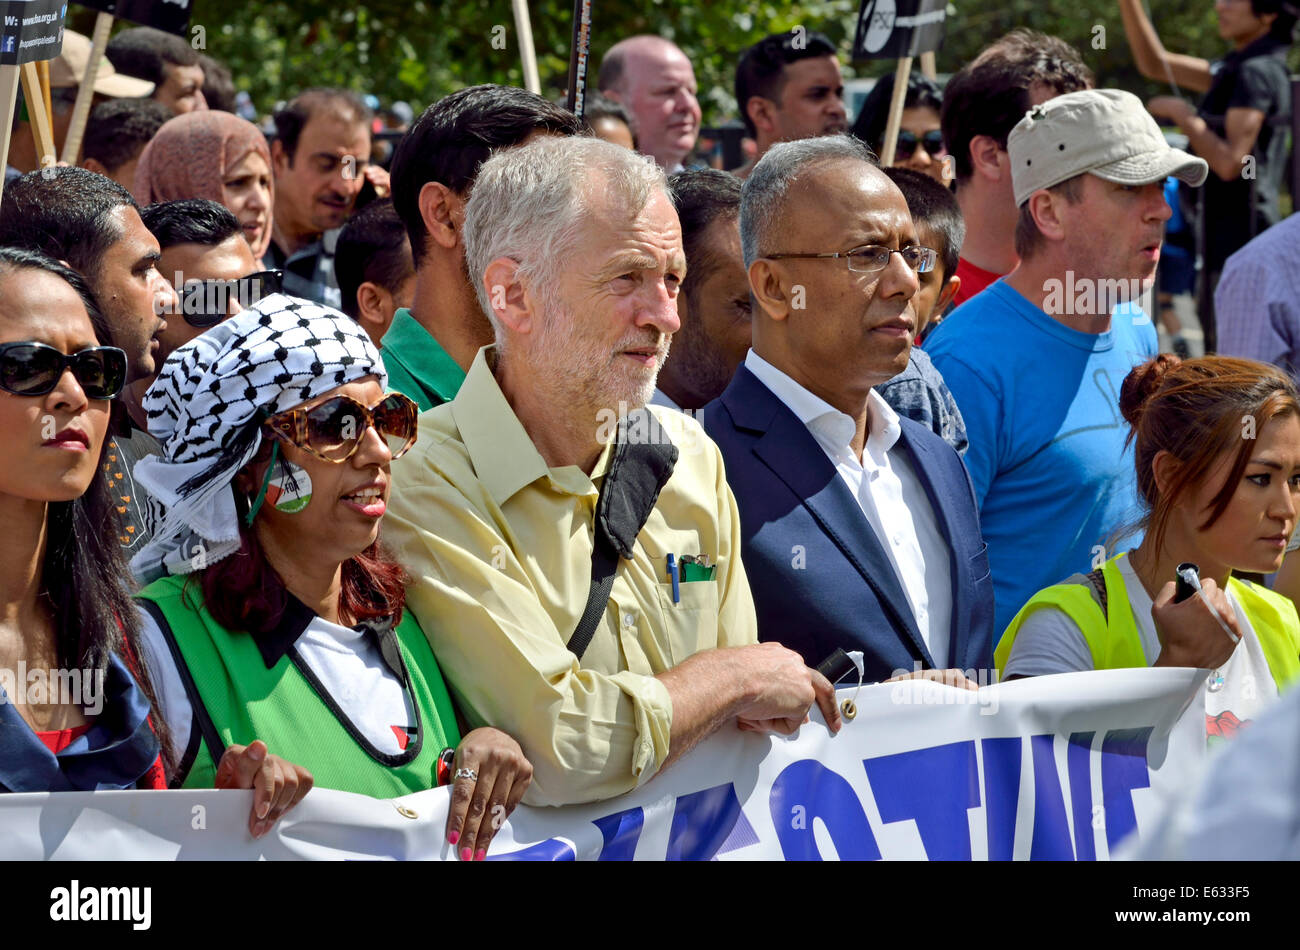 Jeremy Corbyn MP and Lutfur Rahman (mayor of Tower Hamlets) on the March for Gaza, London, August 9th 2014 Stock Photo